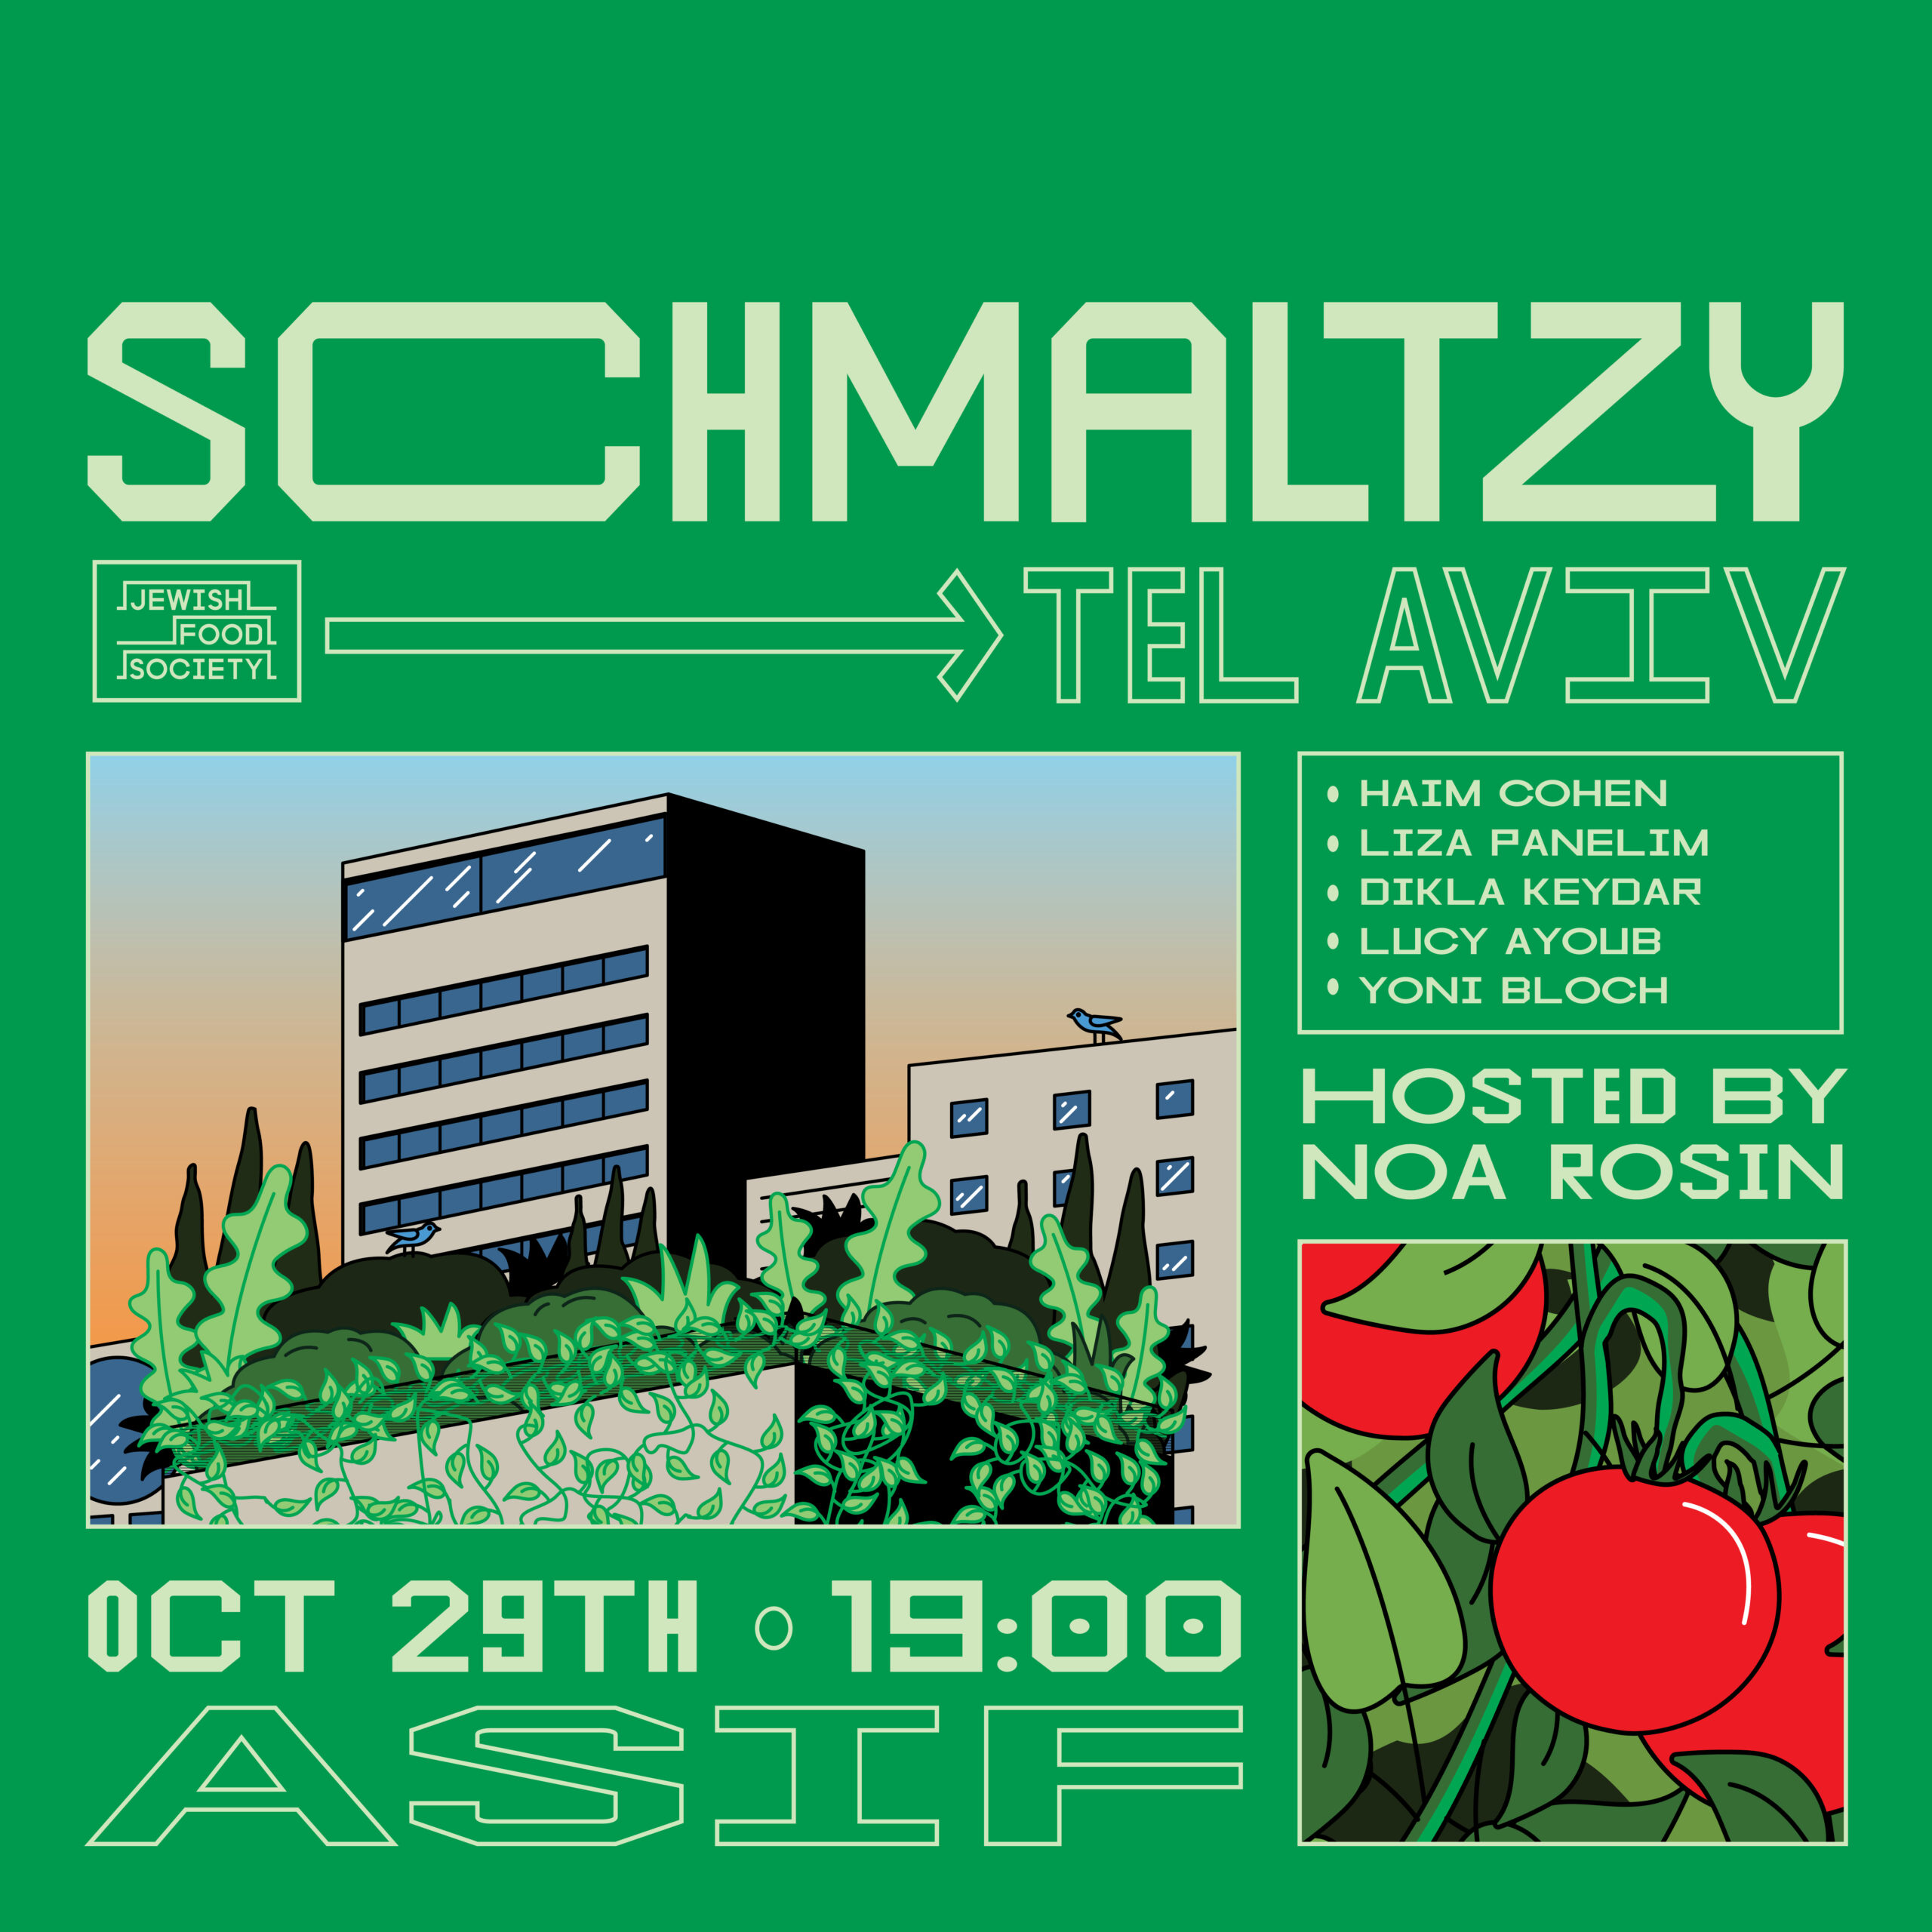 Green poster that says "Schmaltzy Tel Aviv" with event details